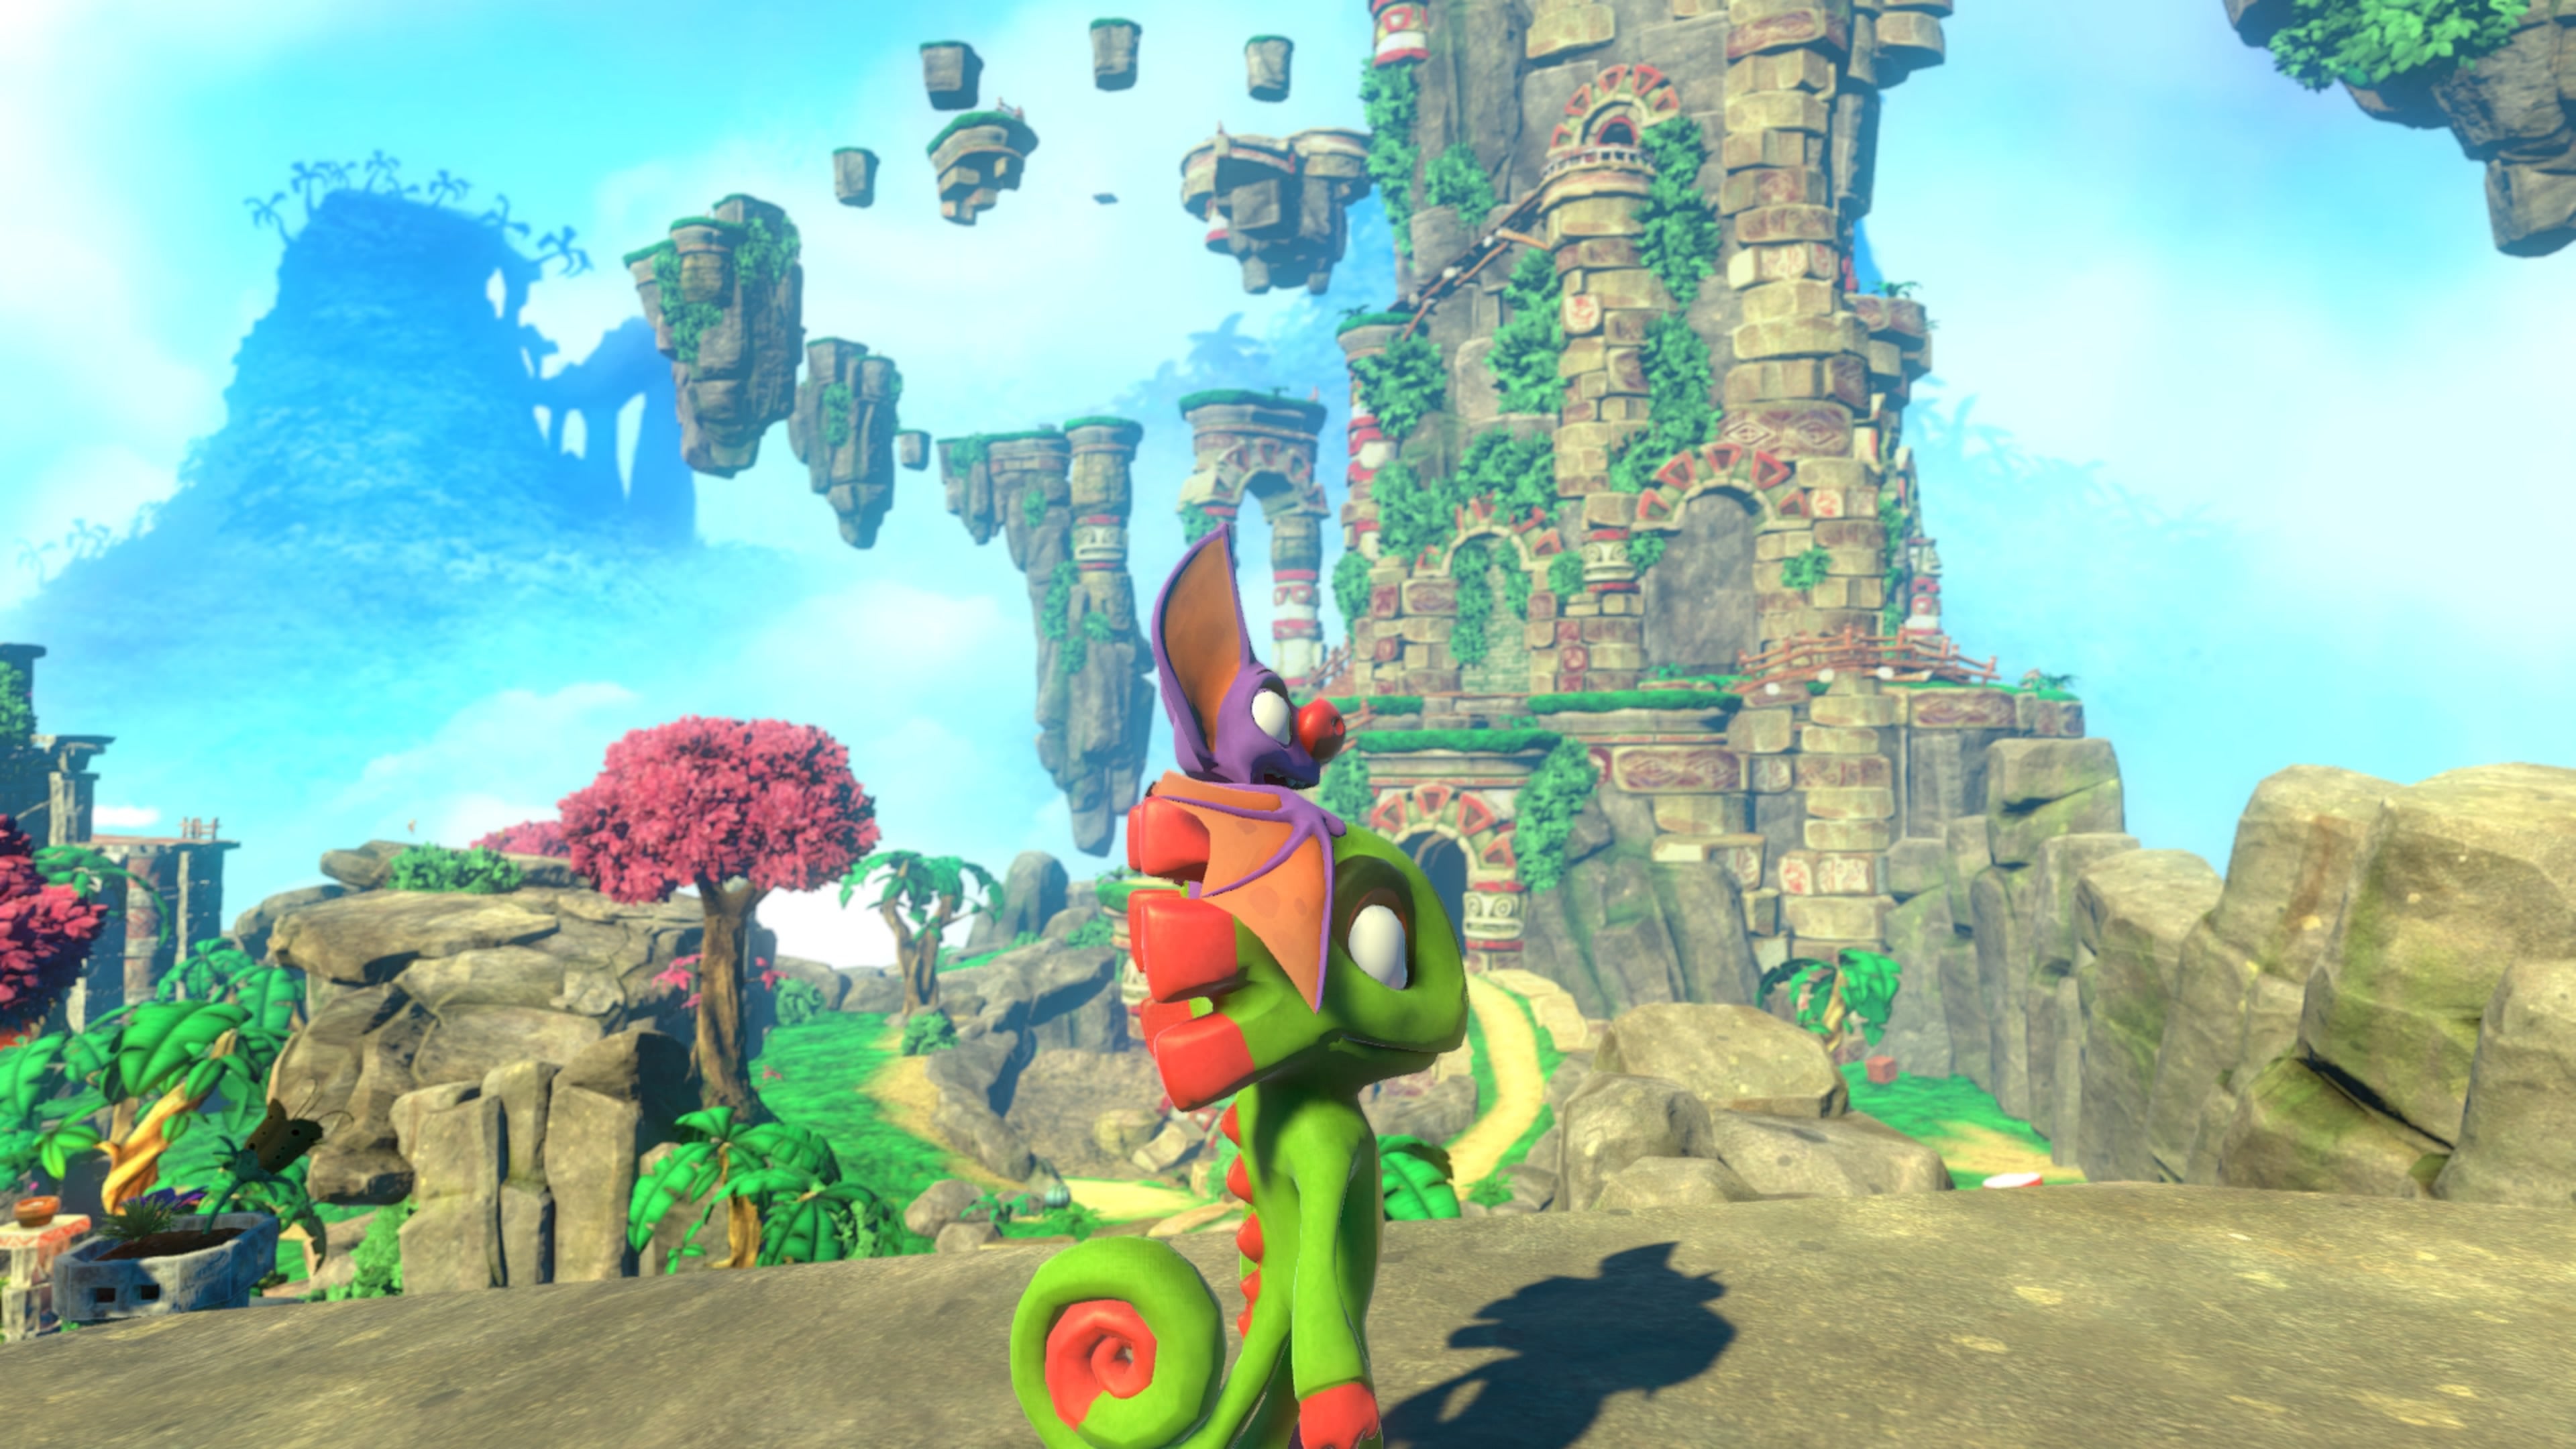 Image for Yooka Laylee Tribalstack Tropics - Pagie Locations, Beat Great Rampo World 1 Boss, Butterfly Heart, Power Extender, Play Coin, Mollycool